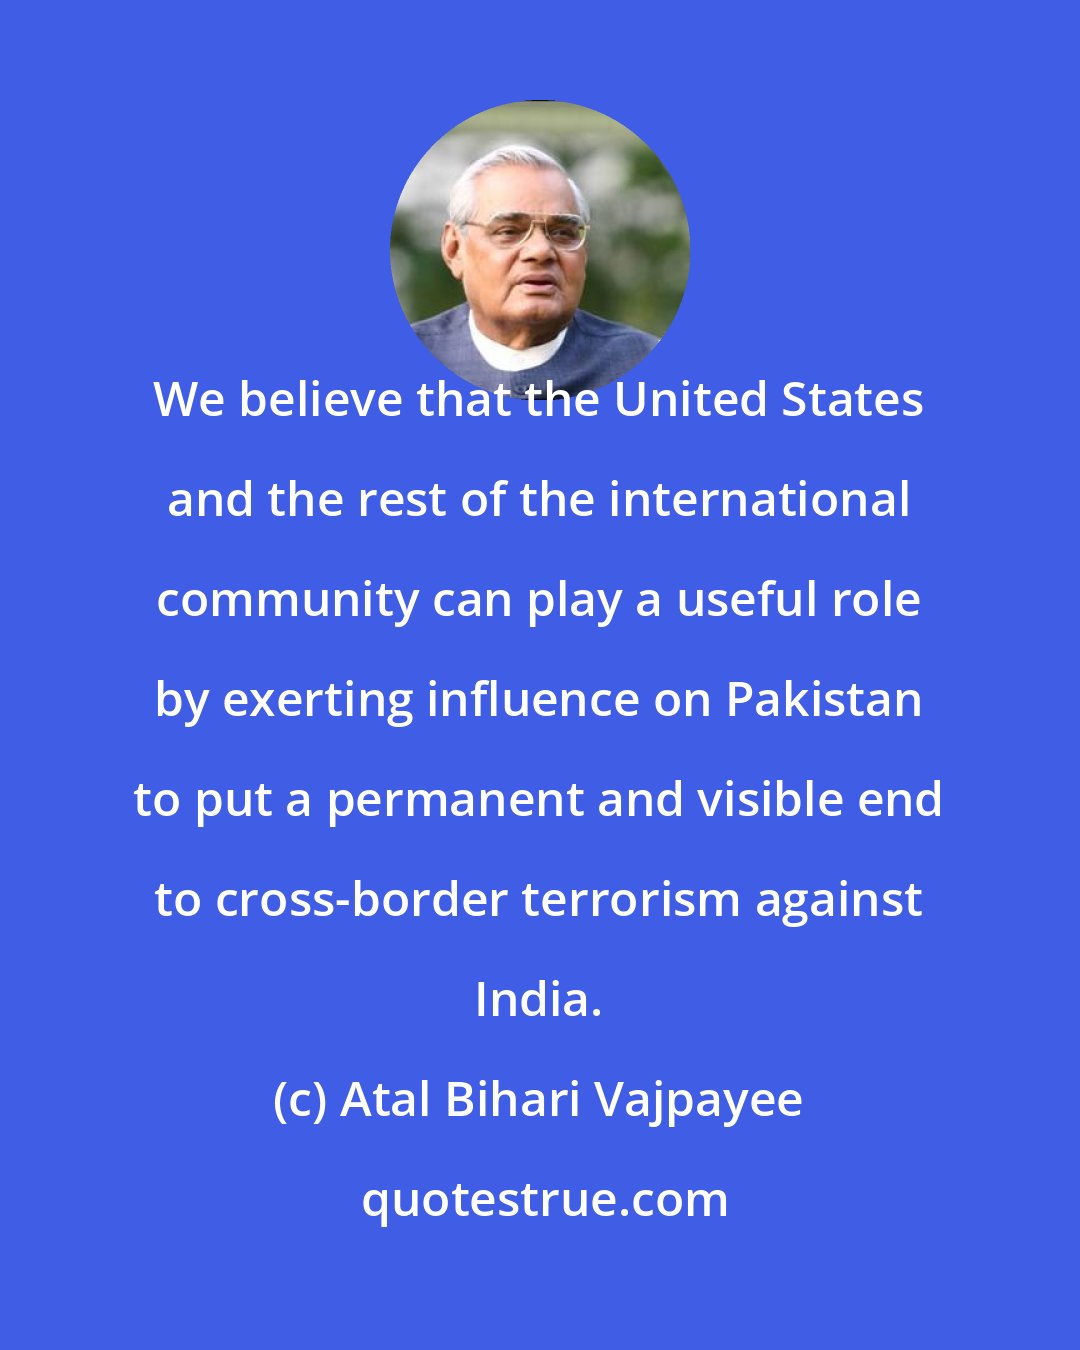 Atal Bihari Vajpayee: We believe that the United States and the rest of the international community can play a useful role by exerting influence on Pakistan to put a permanent and visible end to cross-border terrorism against India.